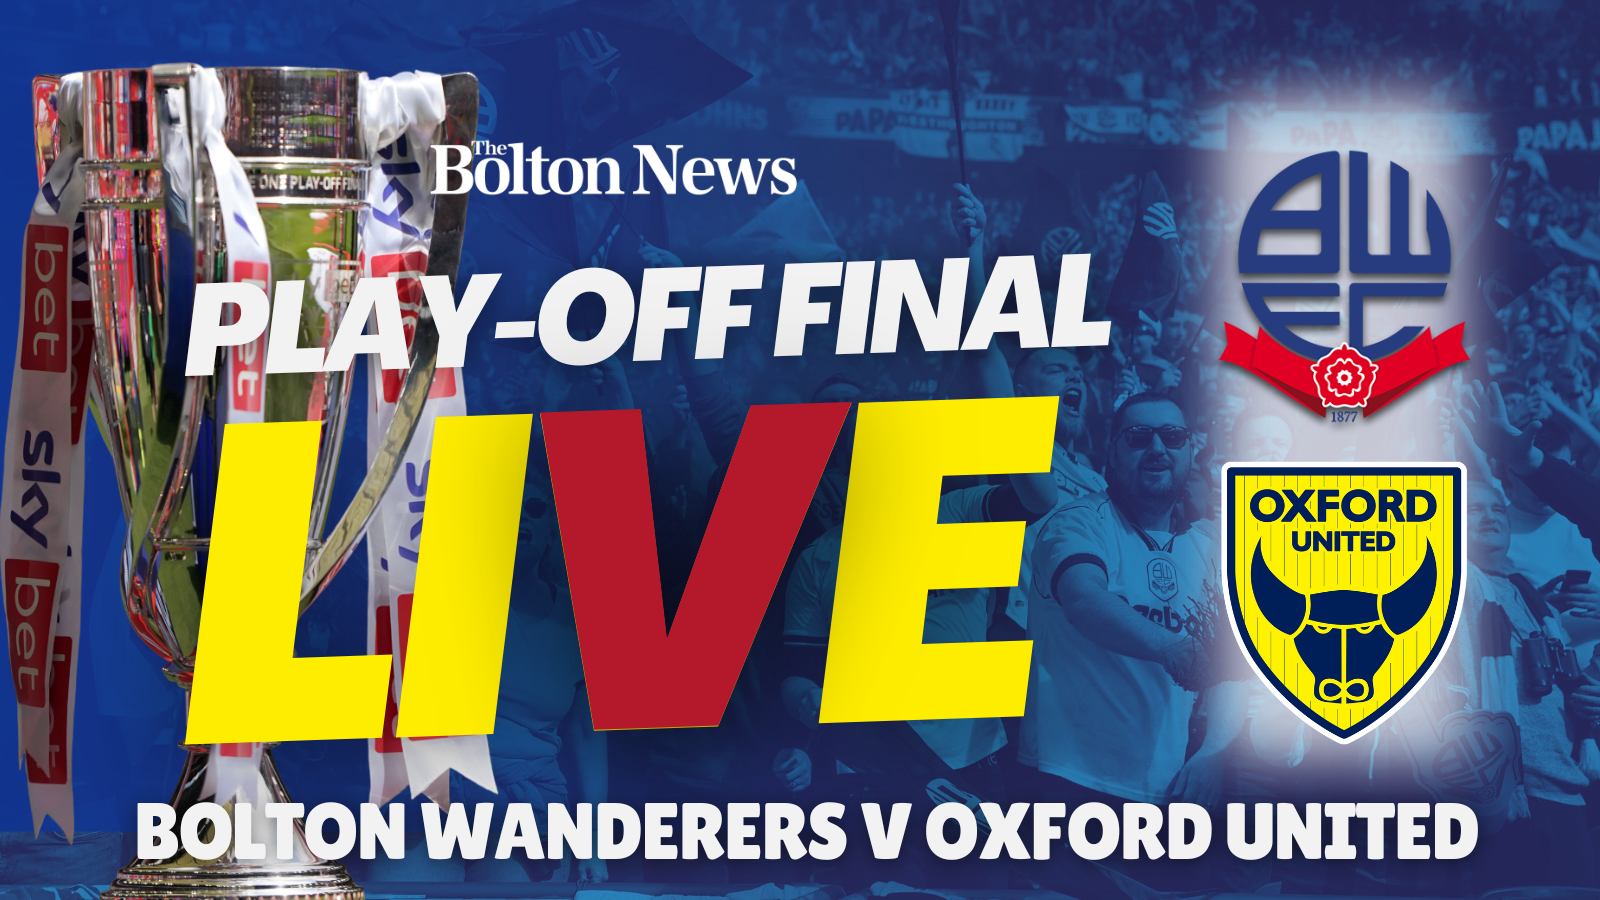 PLAY-OFF FINAL LIVE: Bolton Wanderers v Oxford United